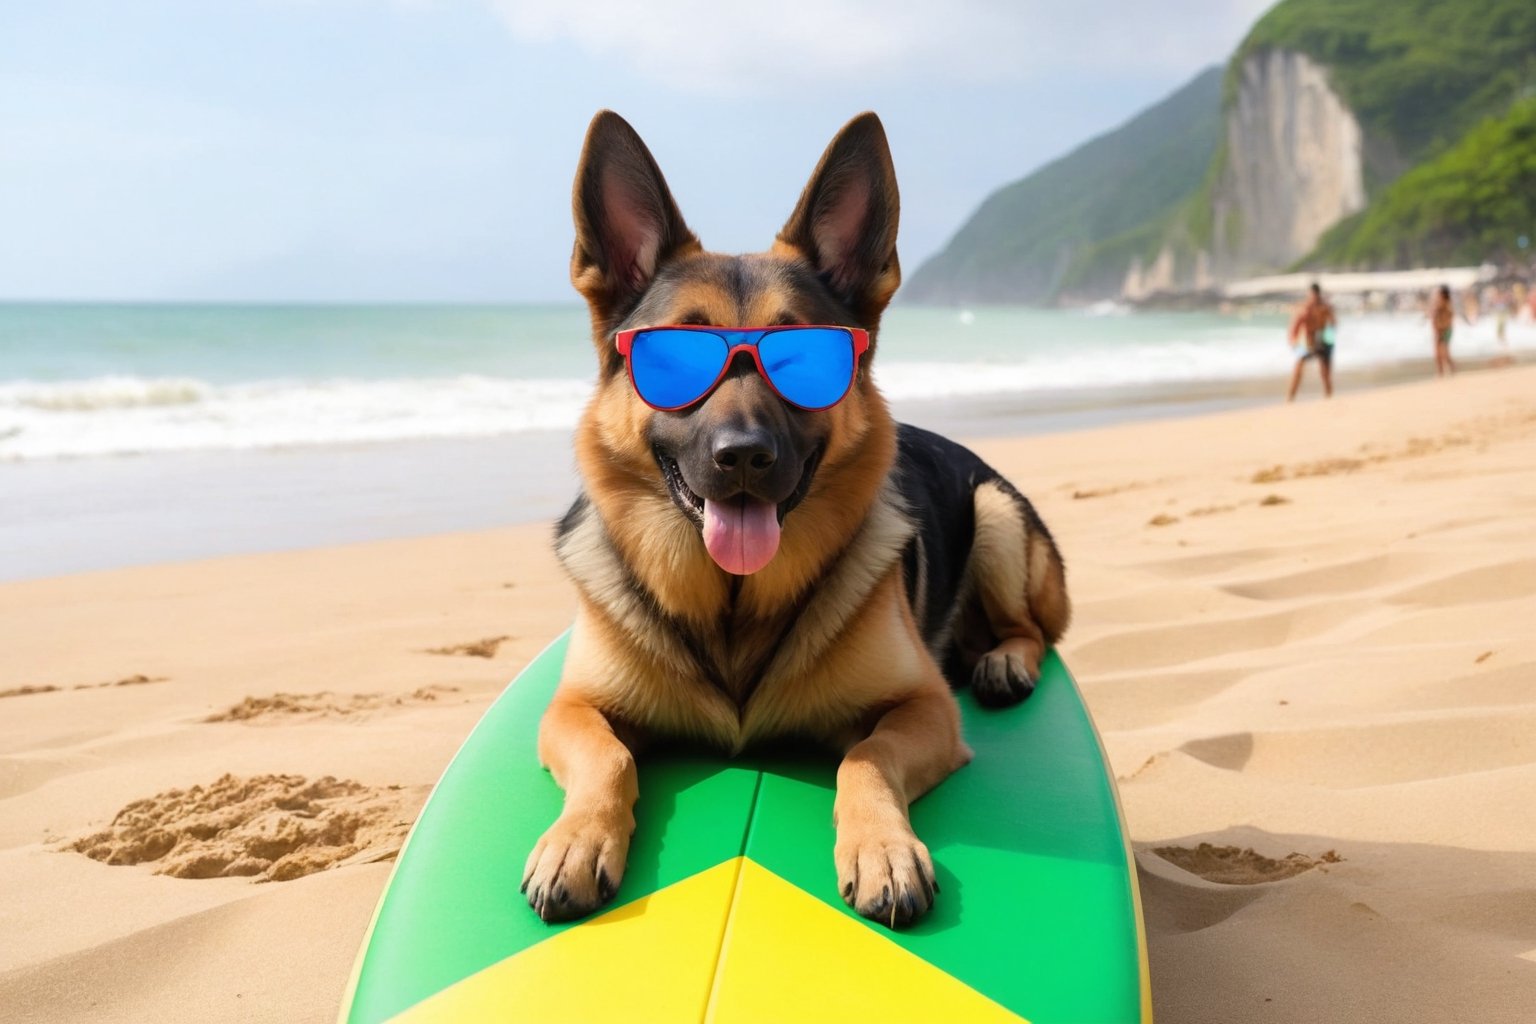 German shepherd dog surfing on the beaches of Brazil Rio de Janeiro, with sunglasses, the surfboard with the colors of the Brazilian flag, with spectators on the beach cheering.